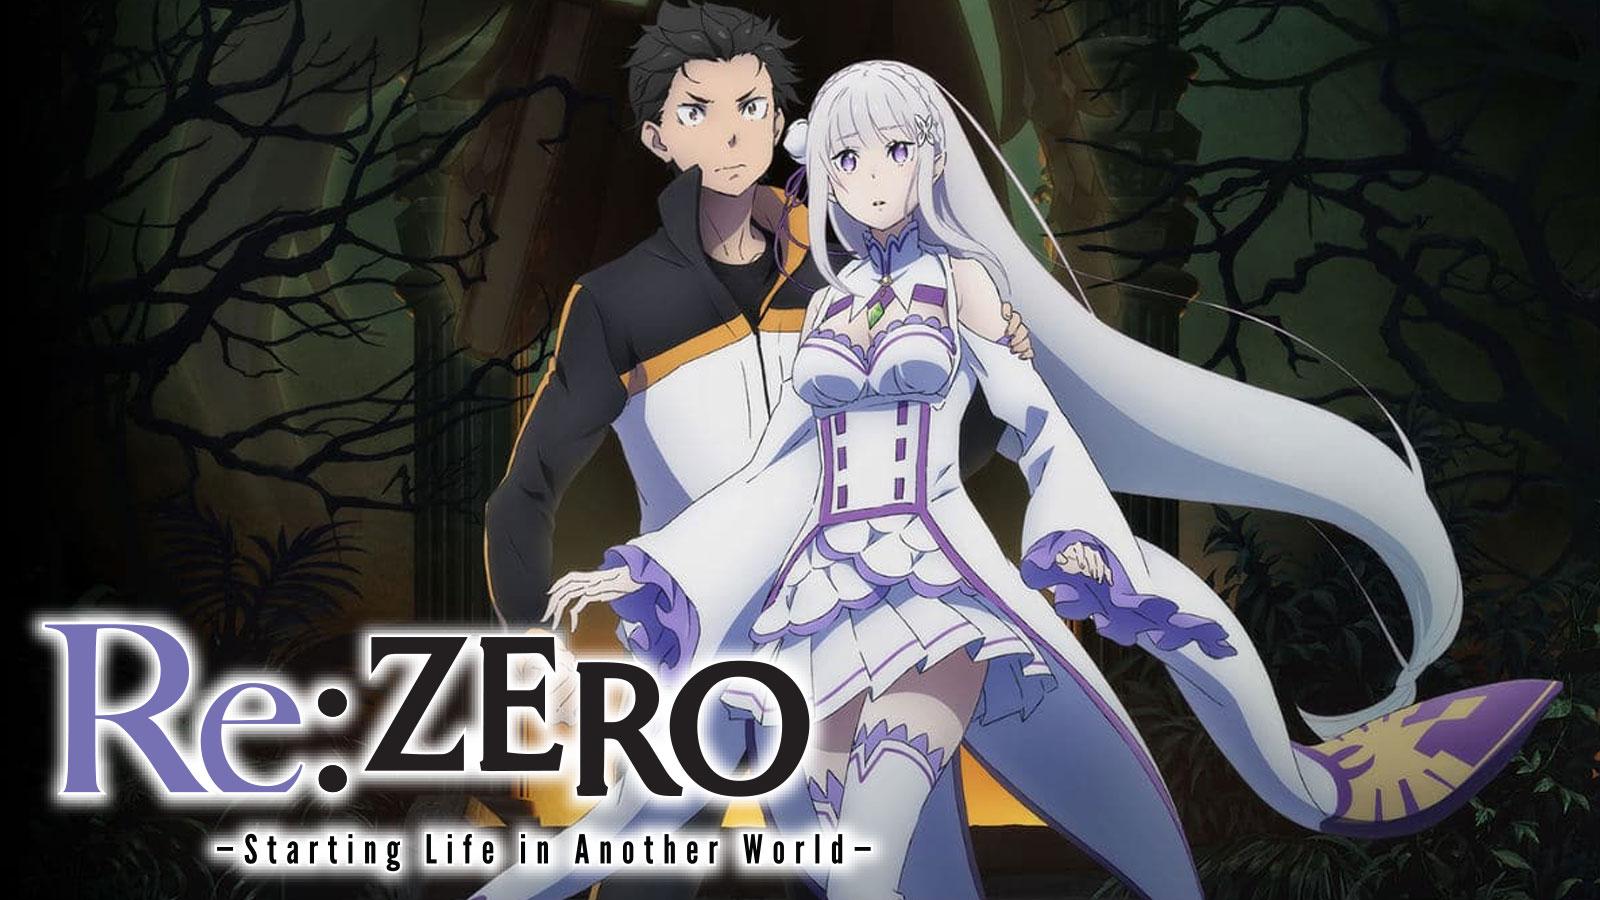 Everything we know about Re:Zero season 2 – release date, trailer